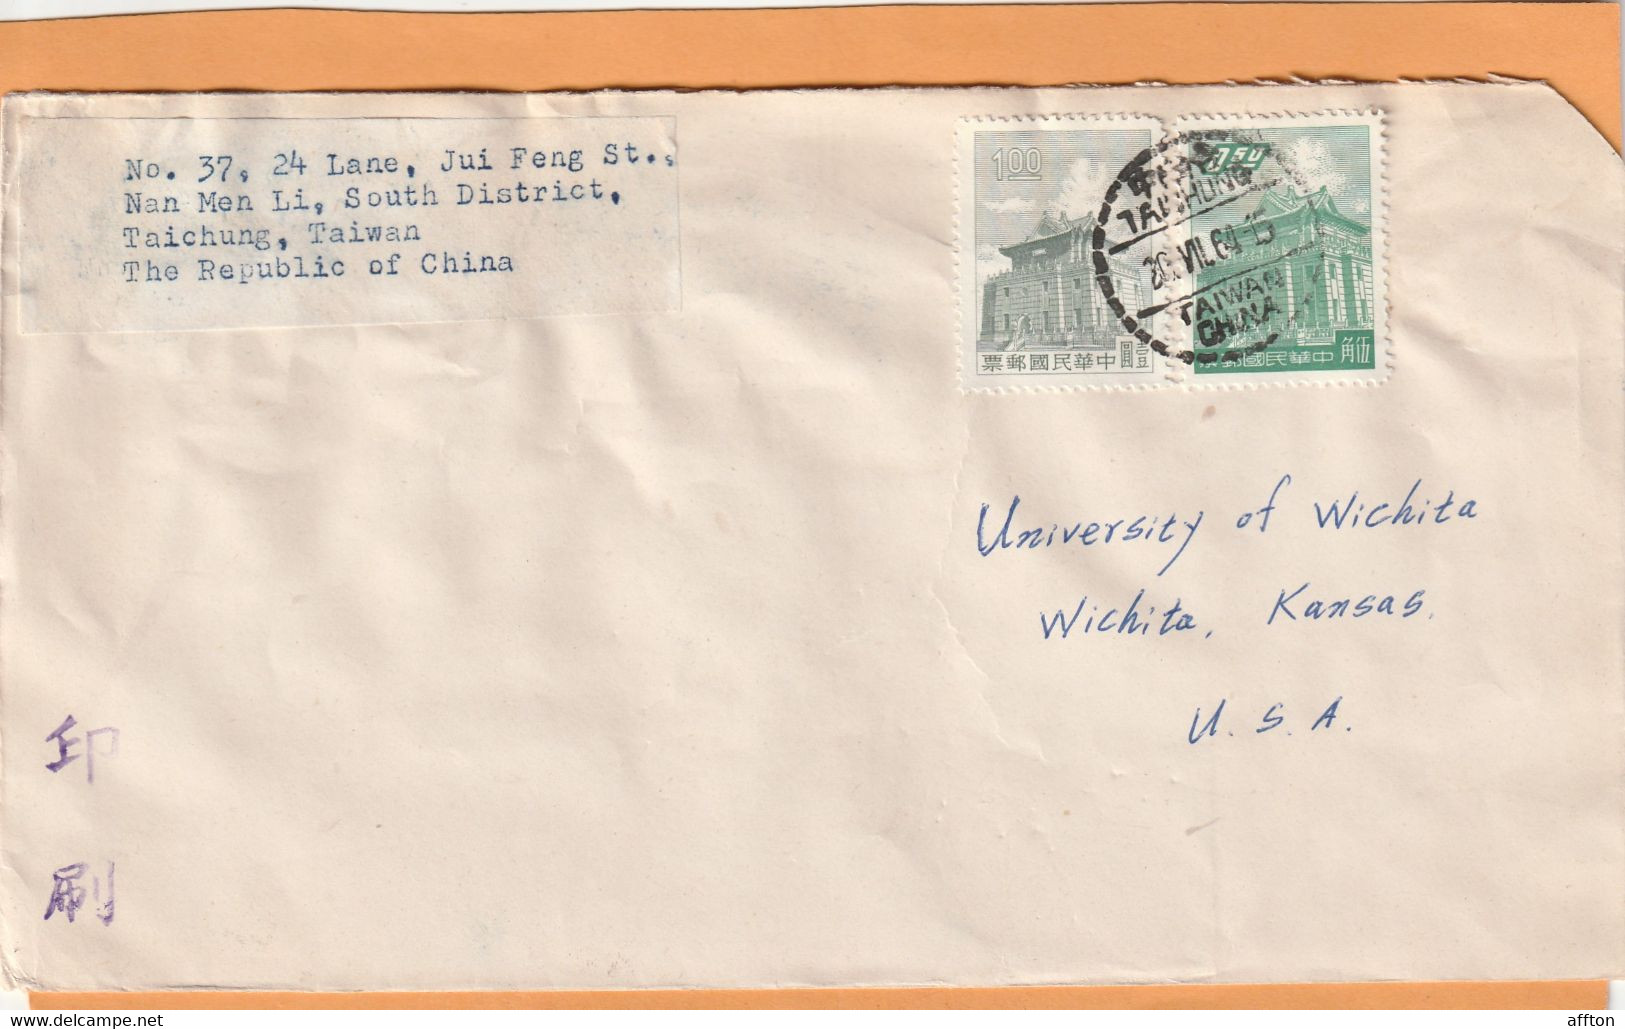 Taiwan ROC China Old Cover Mailed - Briefe U. Dokumente